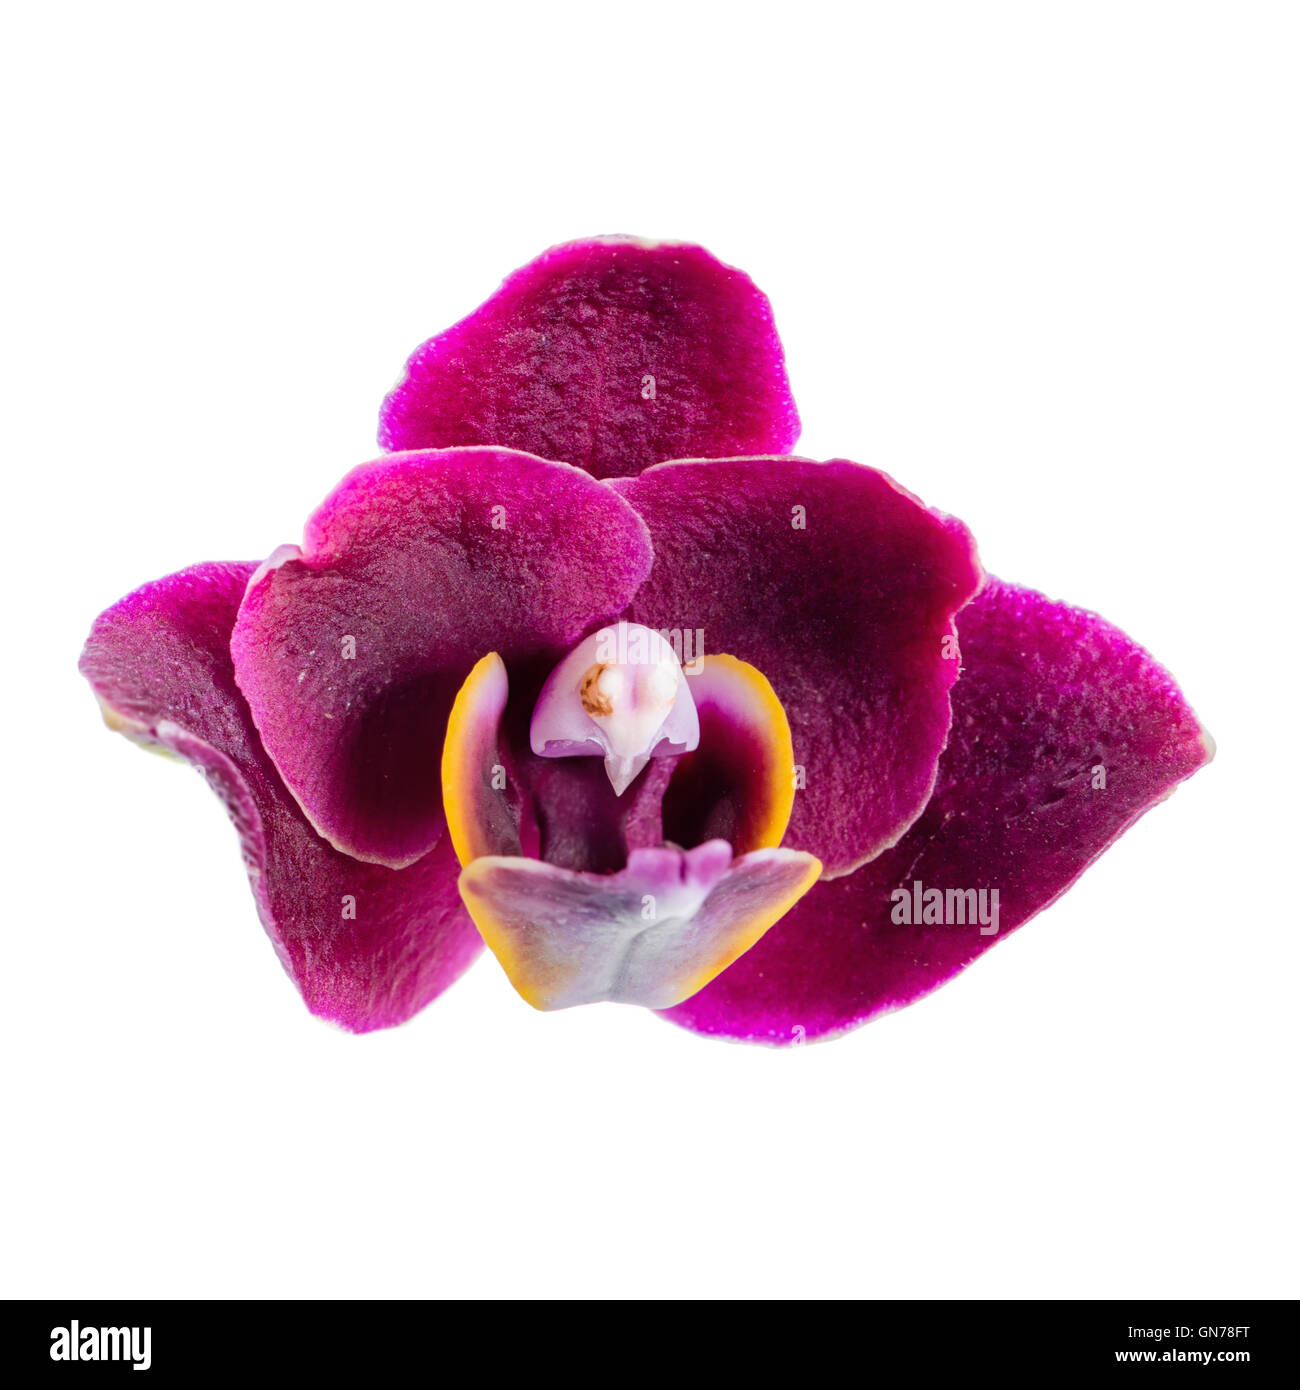 blooming beautiful dark in shades of purple orchid flower, phalaenopsis is isolated on white background, close up Stock Photo